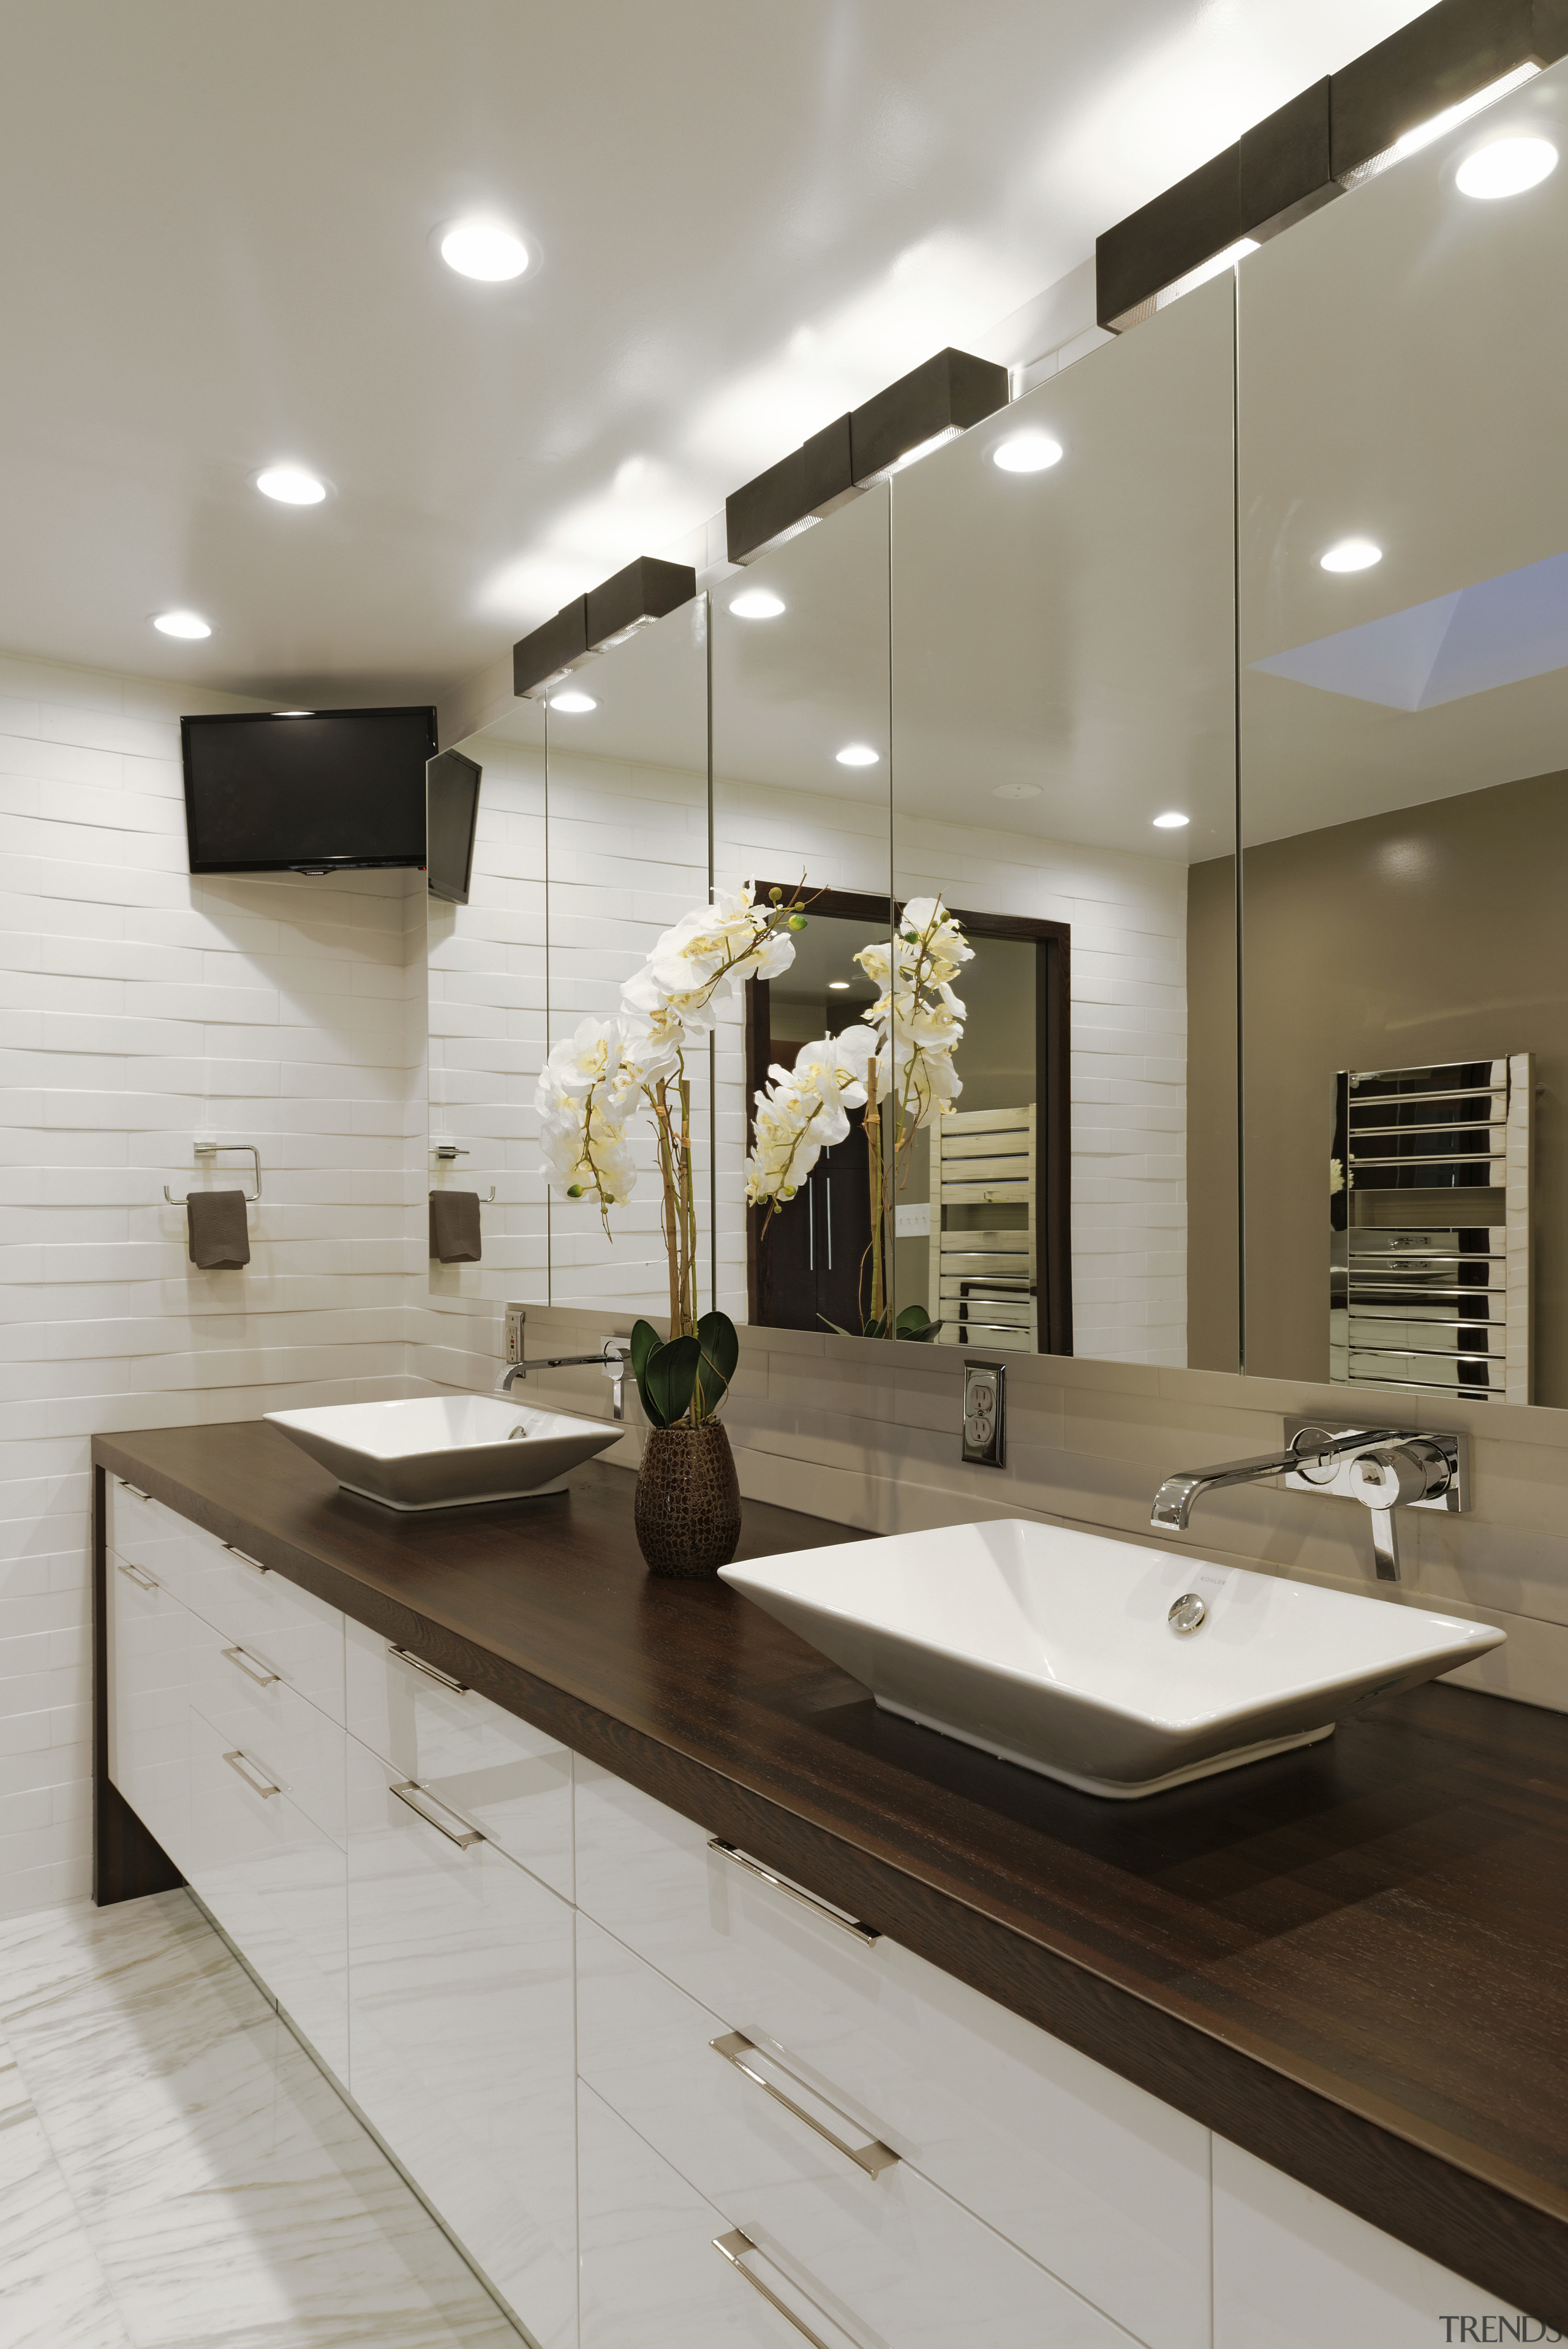 This bathroom features wenge countertops in a waterfall bathroom, ceiling, countertop, interior design, kitchen, room, sink, tap, gray, brown